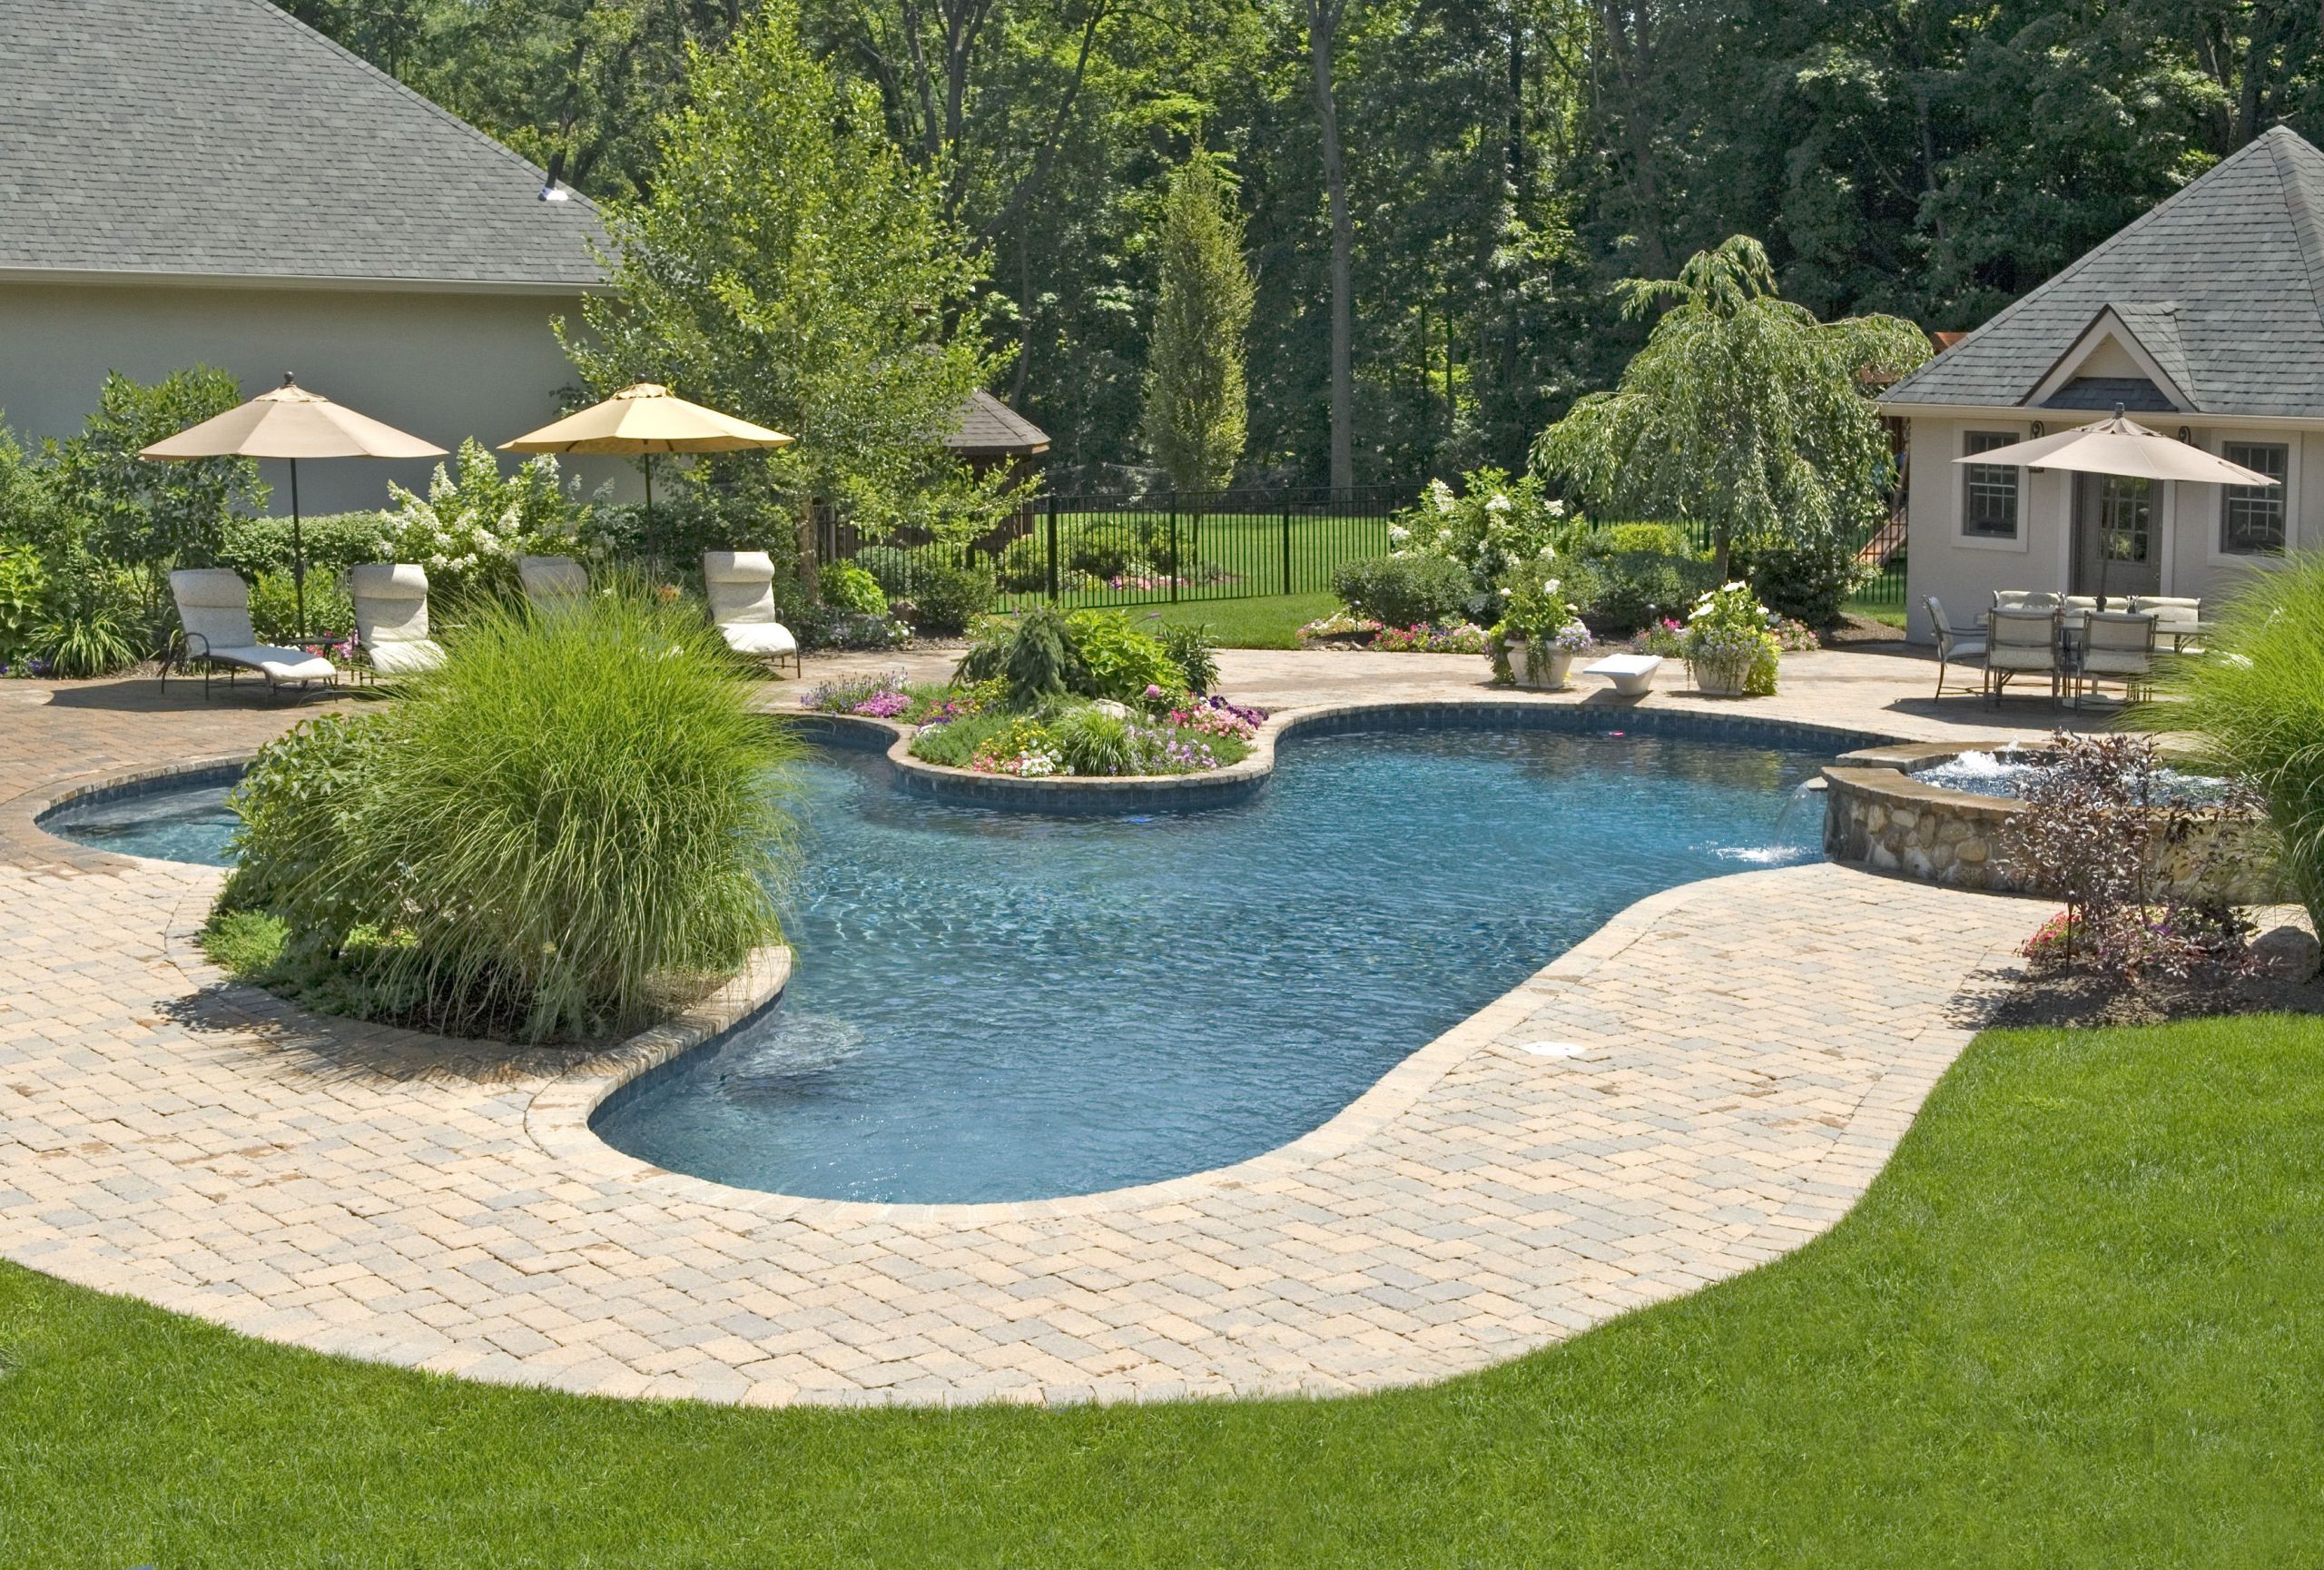 Pool Backyard Ideas
 Backyard Pool Ideas for a Better Relaxing Station to Try